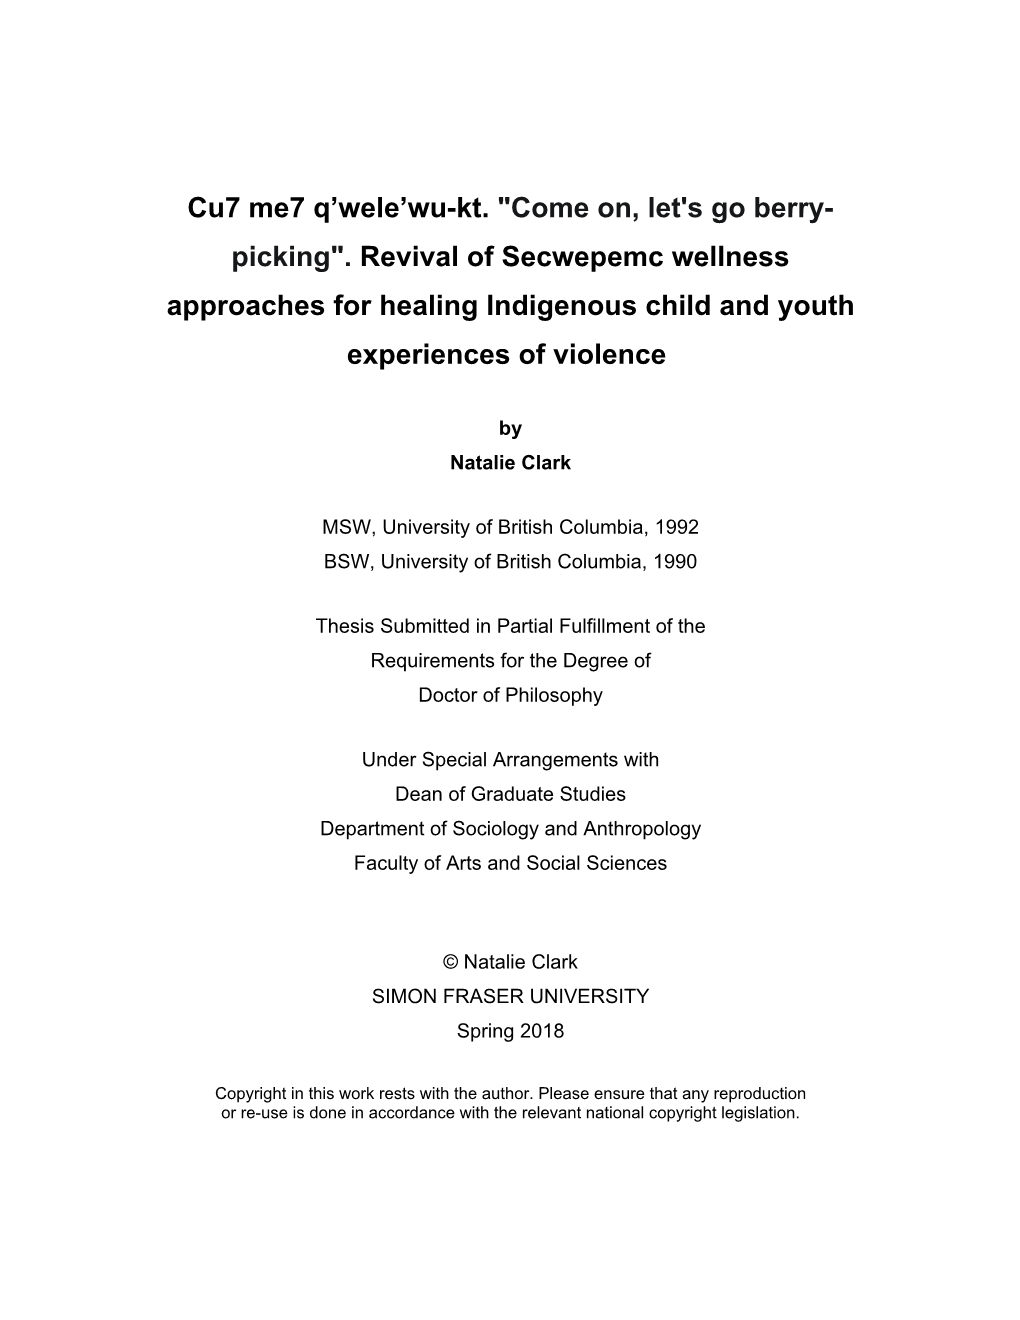 Revival of Secwepemc Wellness Approaches for Healing Indigenous Child and Youth Experiences of Violence